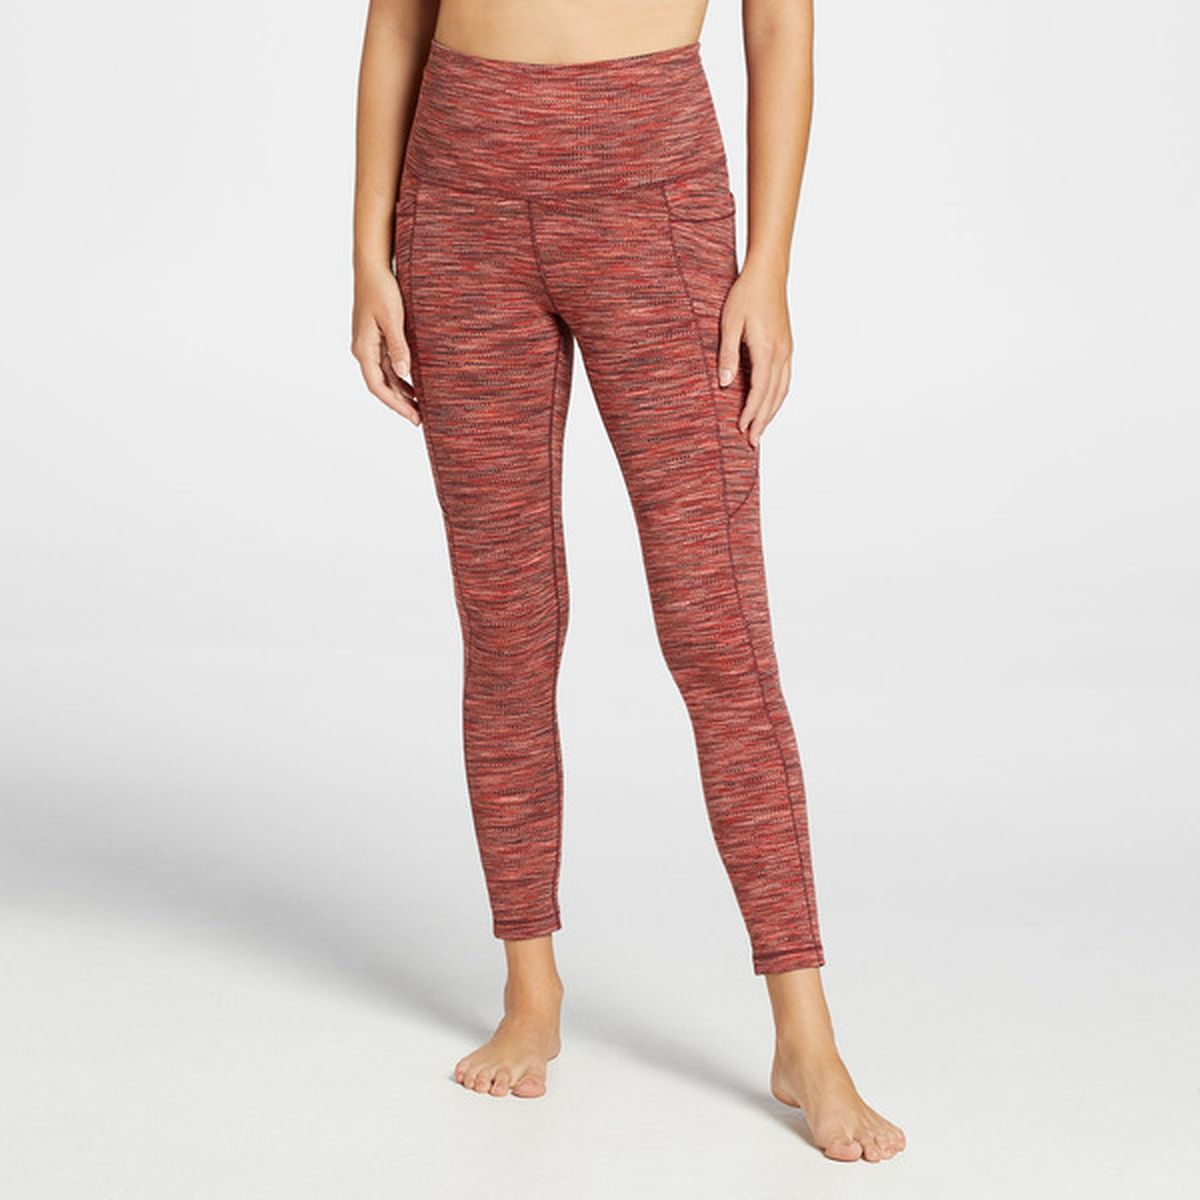 Essential CALIA Women's Ultra High Rise Jacquard 7/8 Legging - XS - NWT -  $29 New With Tags - From Elizabeth